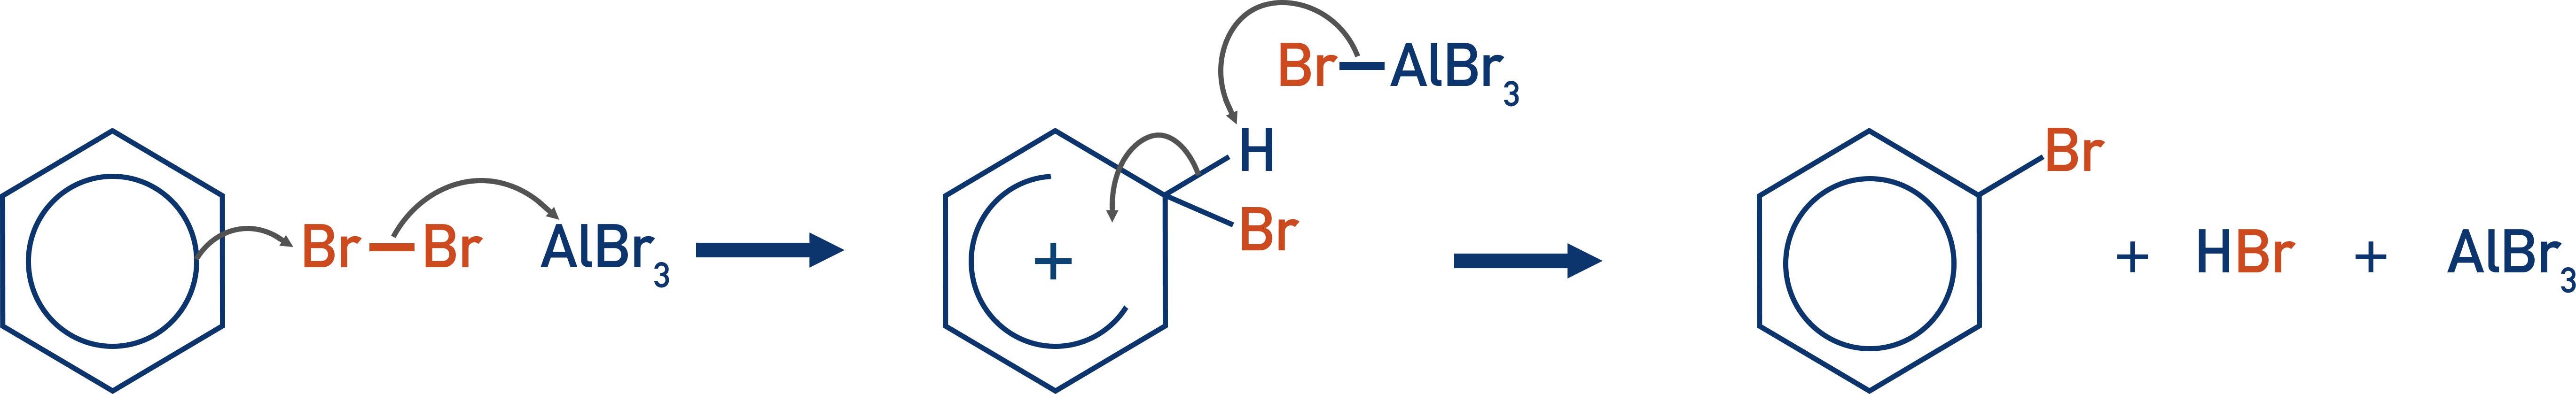 bromination of benzene mechanism electrophilic substitution a-level chemistry